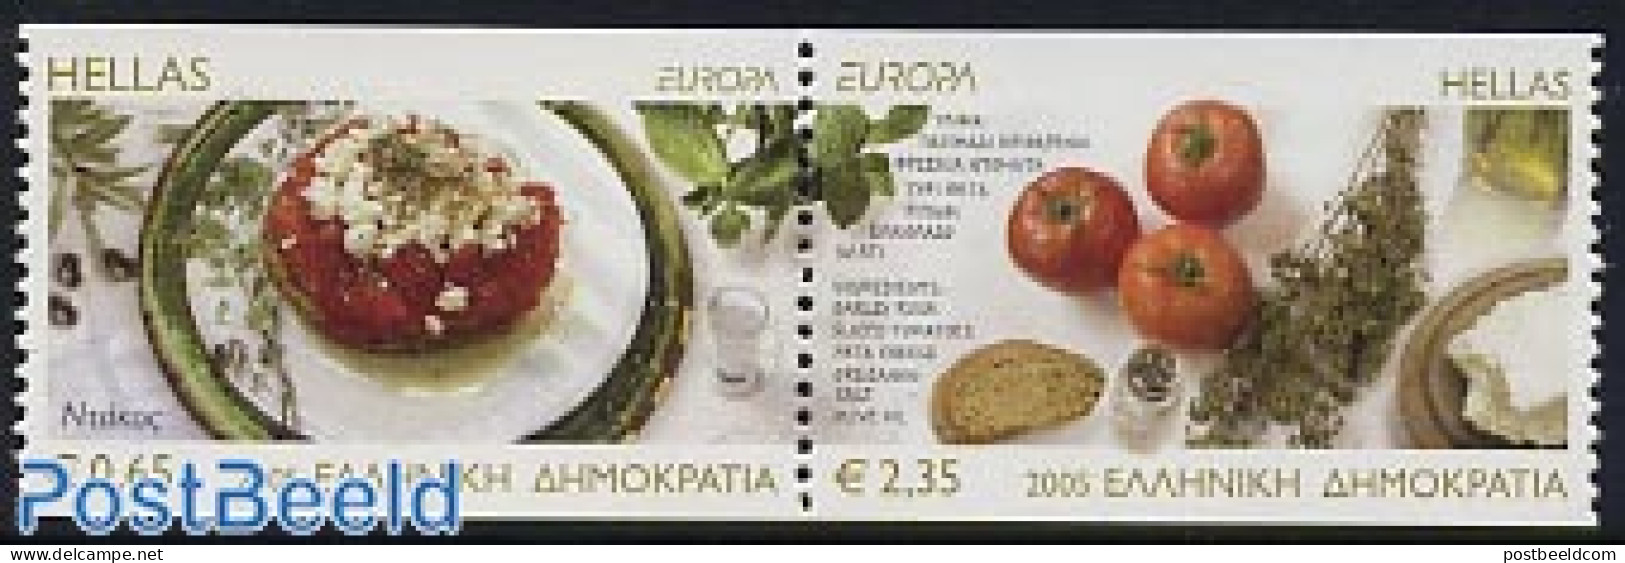 Greece 2005 Europa, Gastronomy 2v [:] From Booklets, Mint NH, Health - History - Food & Drink - Europa (cept) - Nuevos